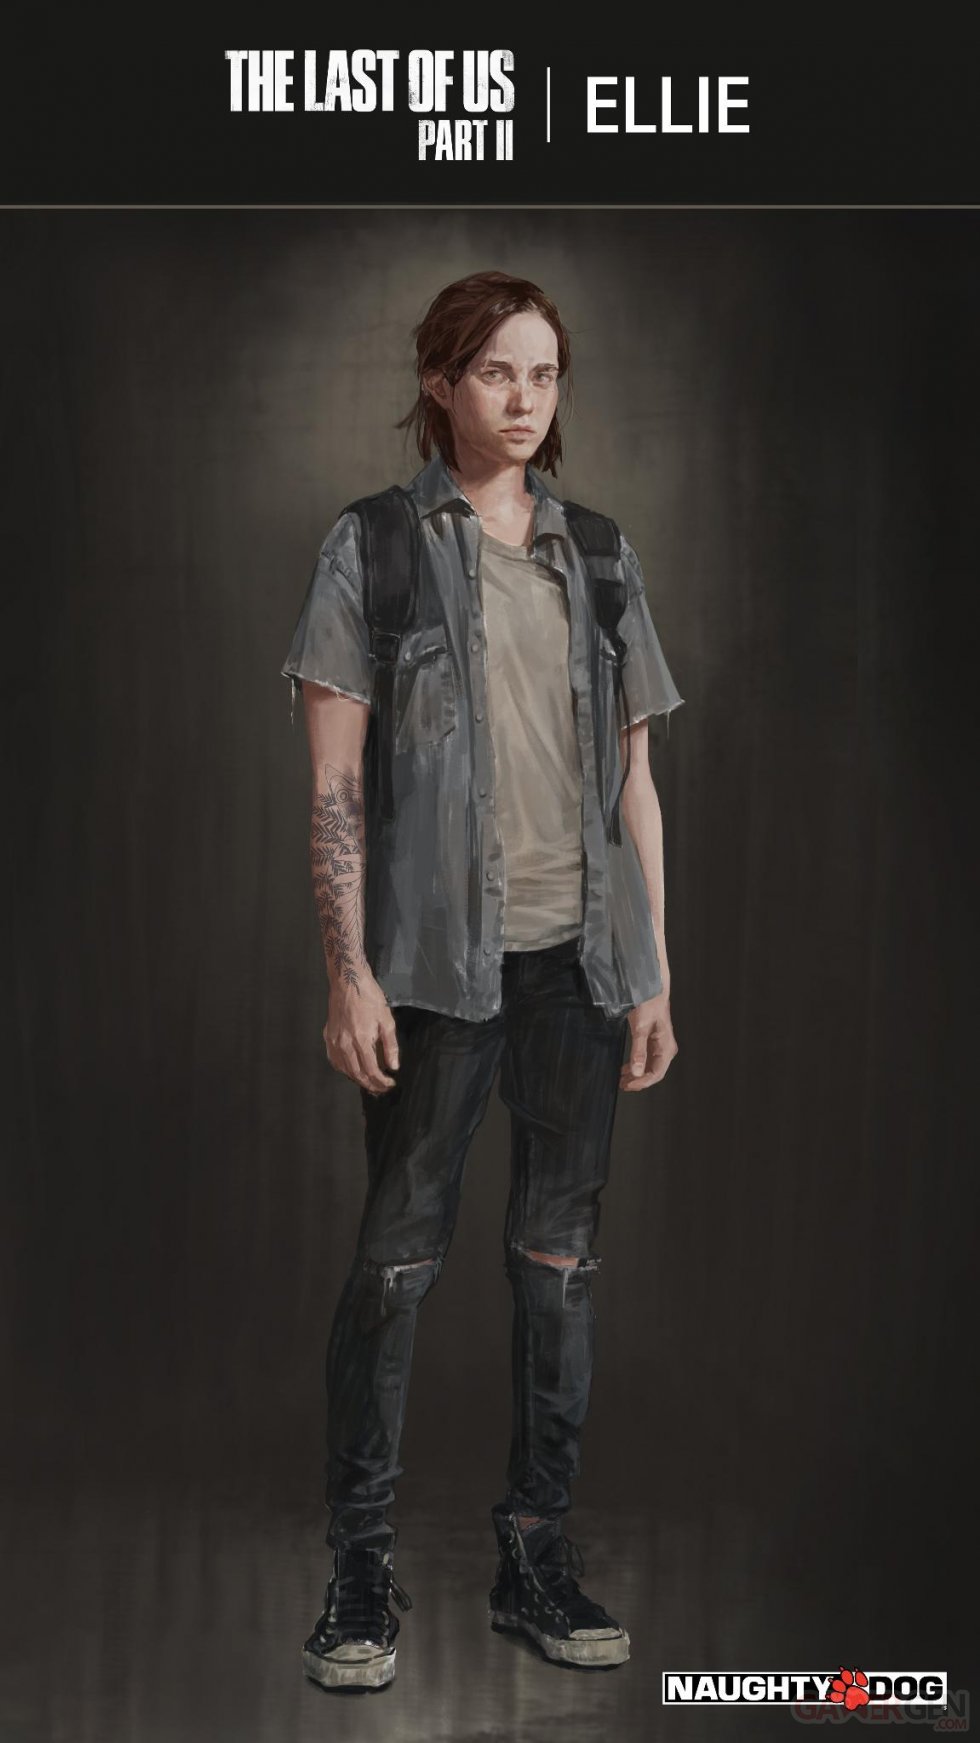 The Last of Us Part II artwork images (2)